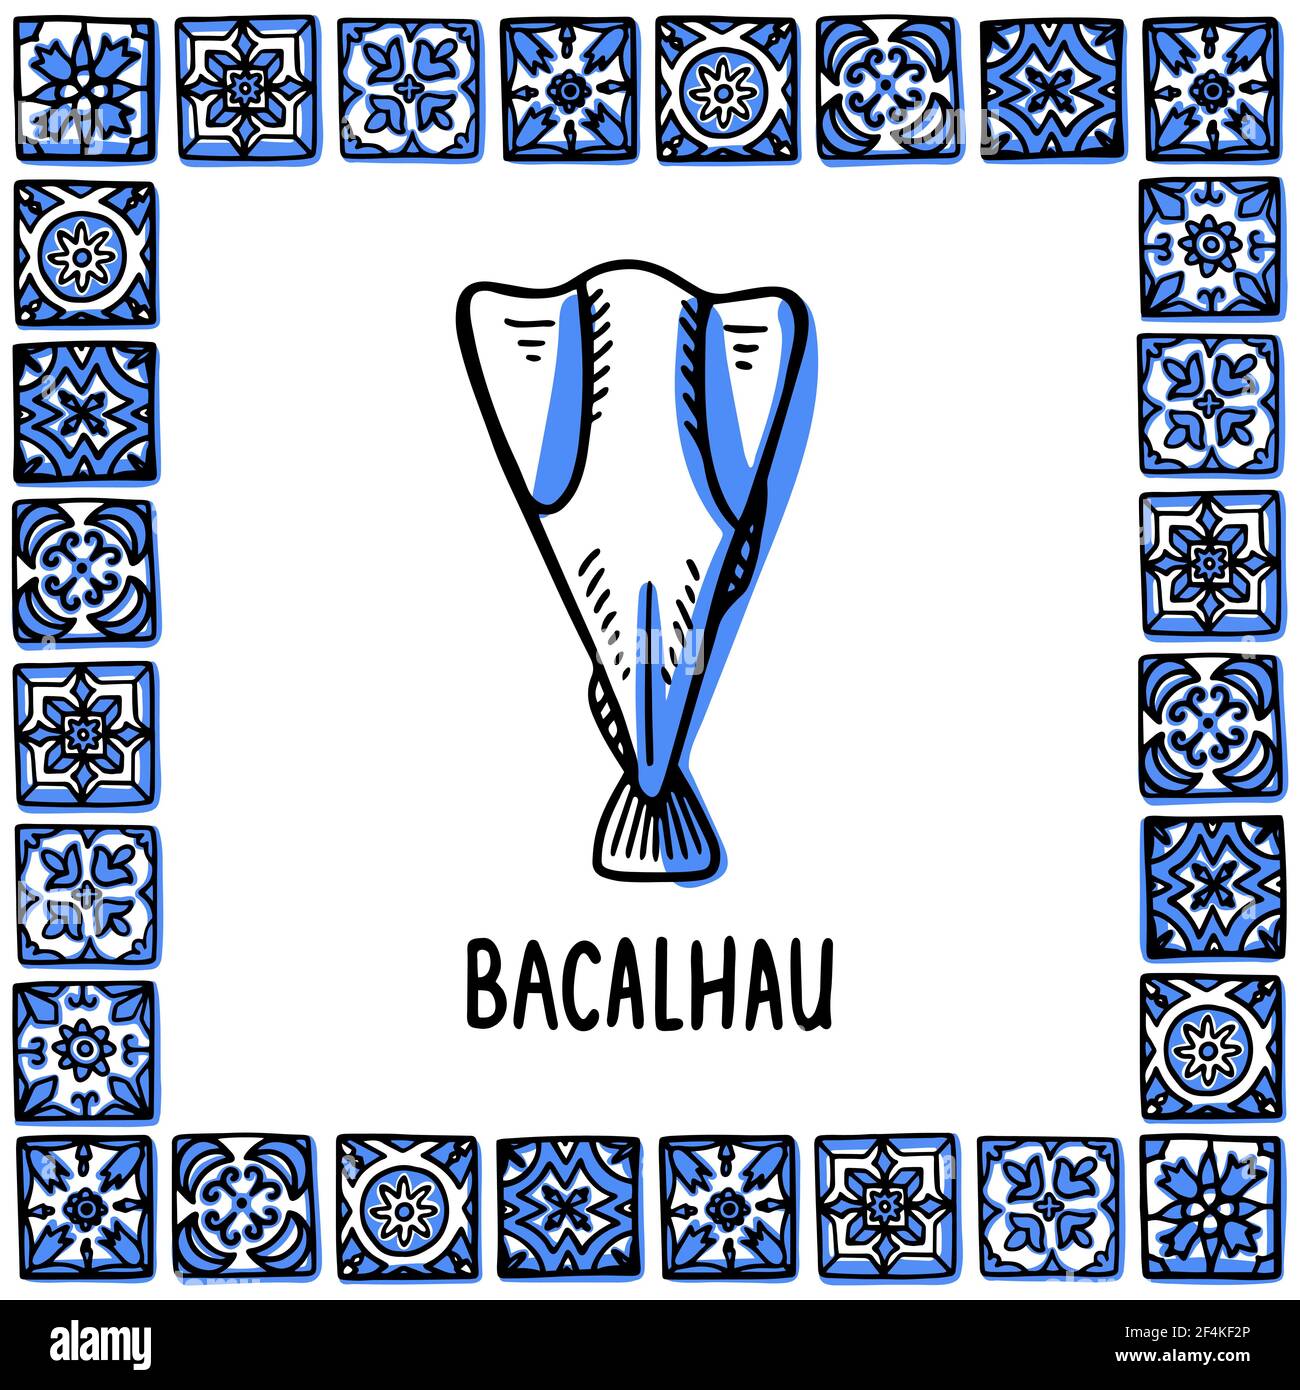 Portugal landmarks set. Bacalhau, traditional salted cod. Cod fish in the frame of Portuguese tiles, azulejo. Handdrawn sketch style vector illustration. Stock Vector